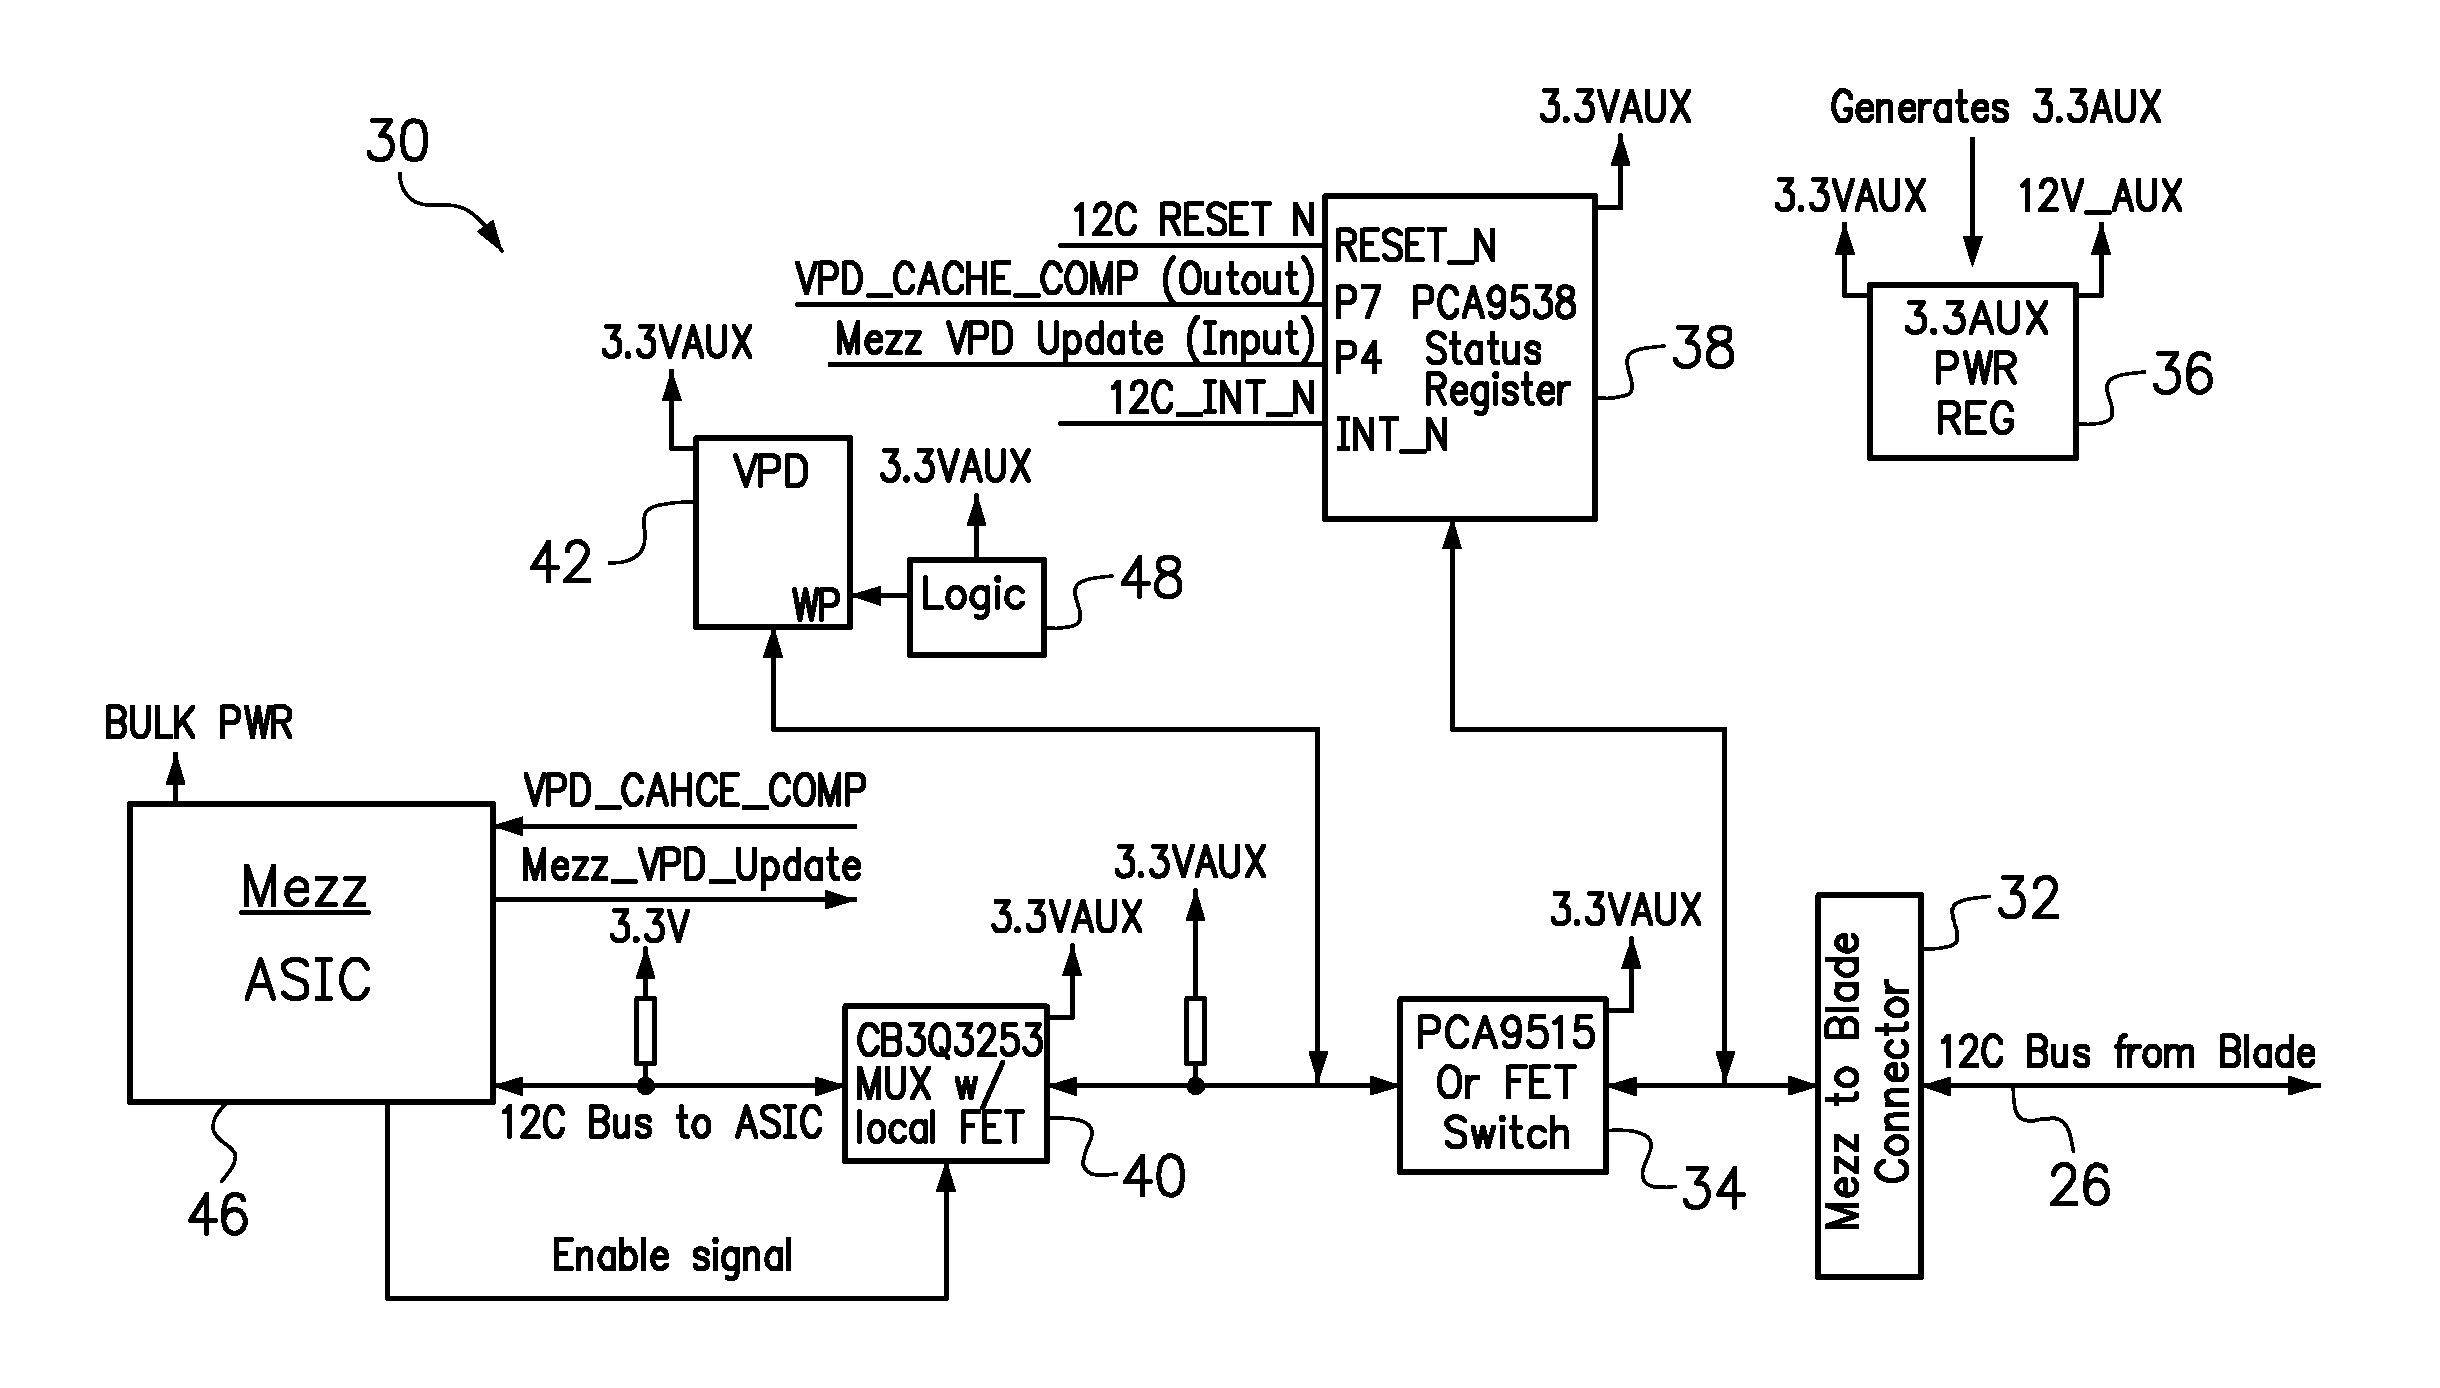 Pseudo multi-master i2c operation in a blade server chassis